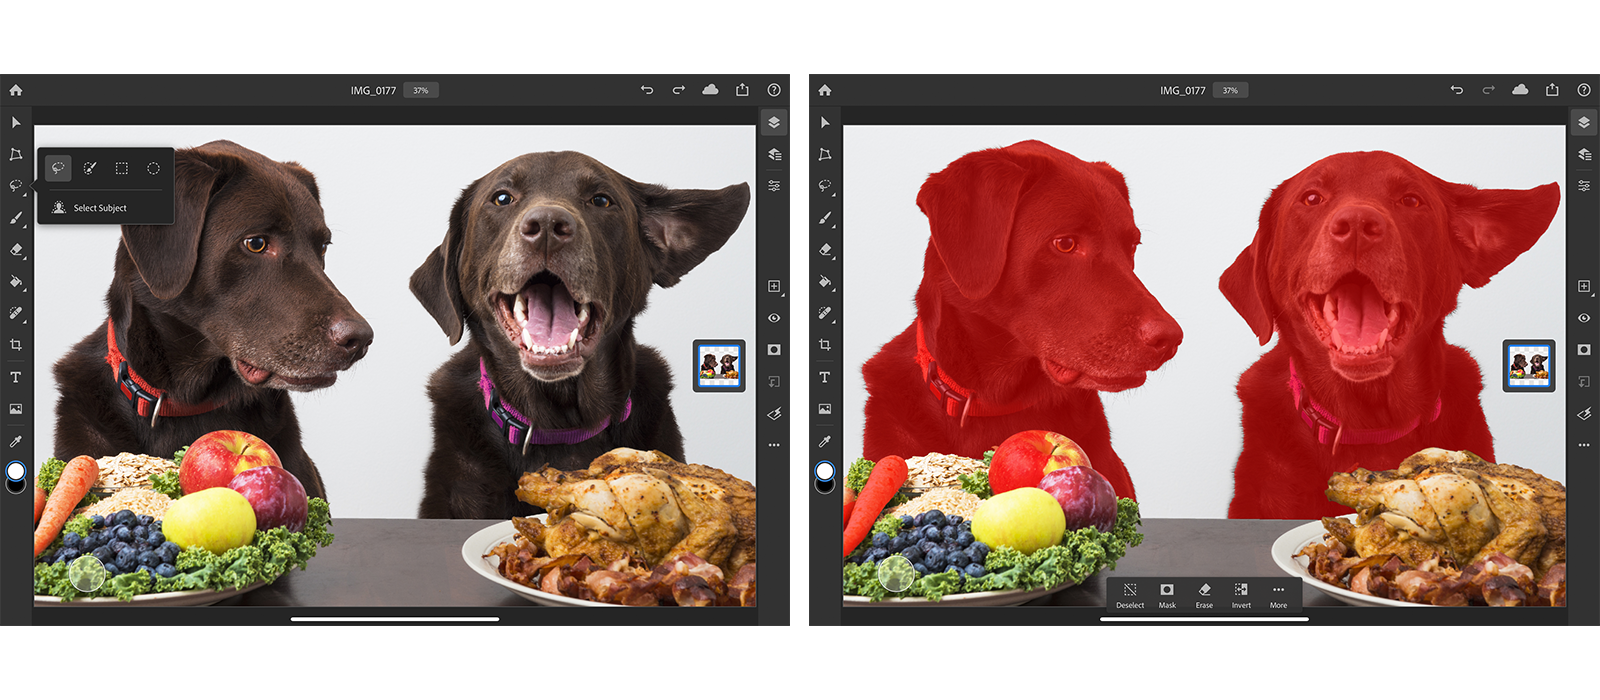 Adobe Adds Smart Select to Photoshop for iPad